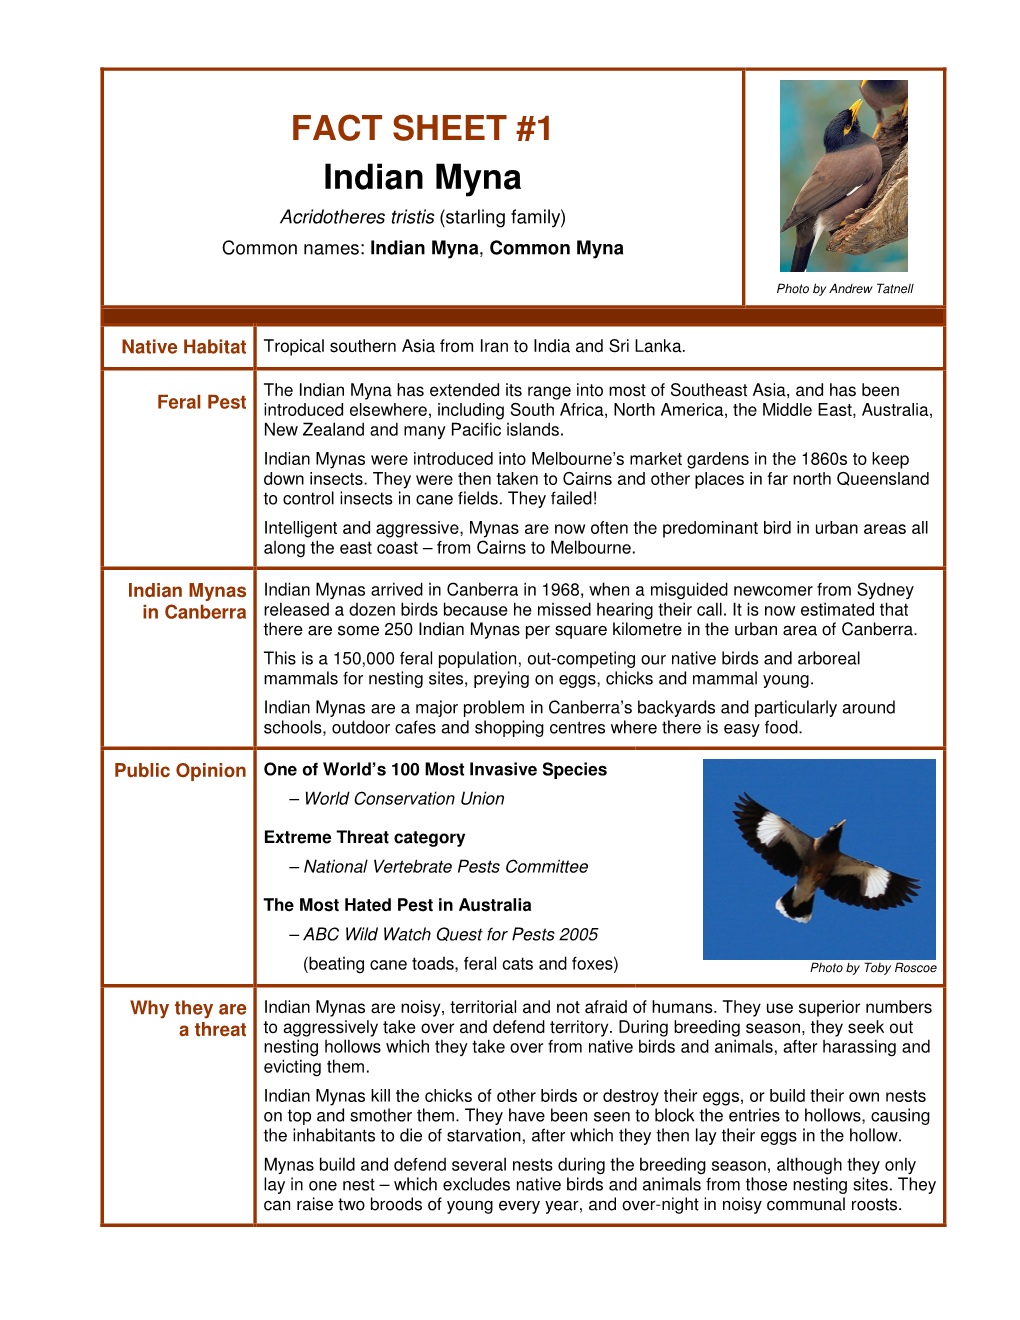 FACT SHEET #1 Indian Myna Acridotheres Tristis (Starling Family) Common Names: Indian Myna , Common Myna